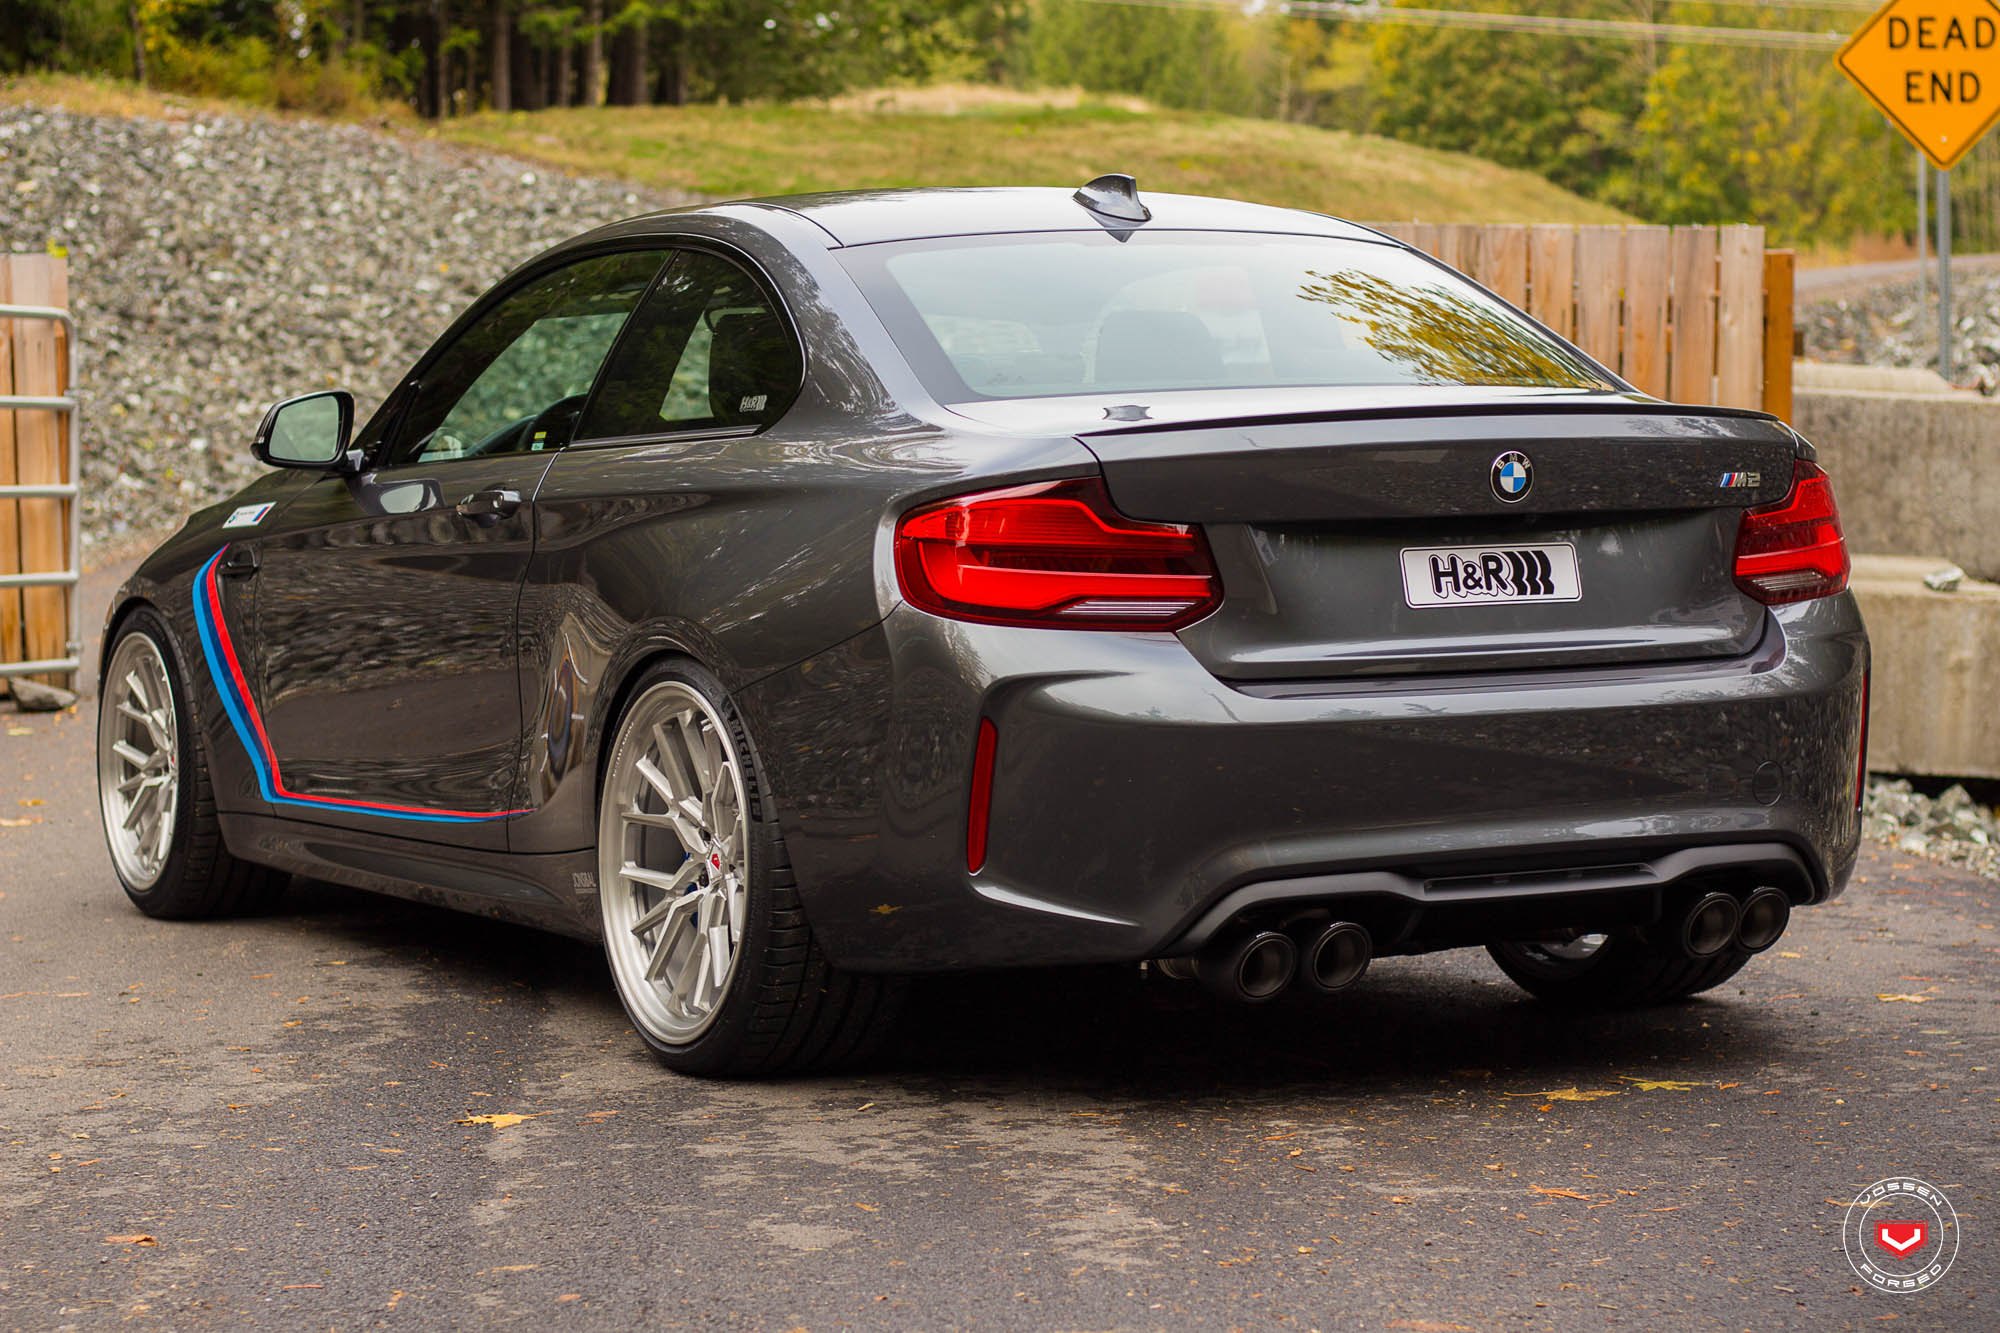 Aftermarket Rear Diffuser on Gray BMW 2-Series - Photo by Vossen